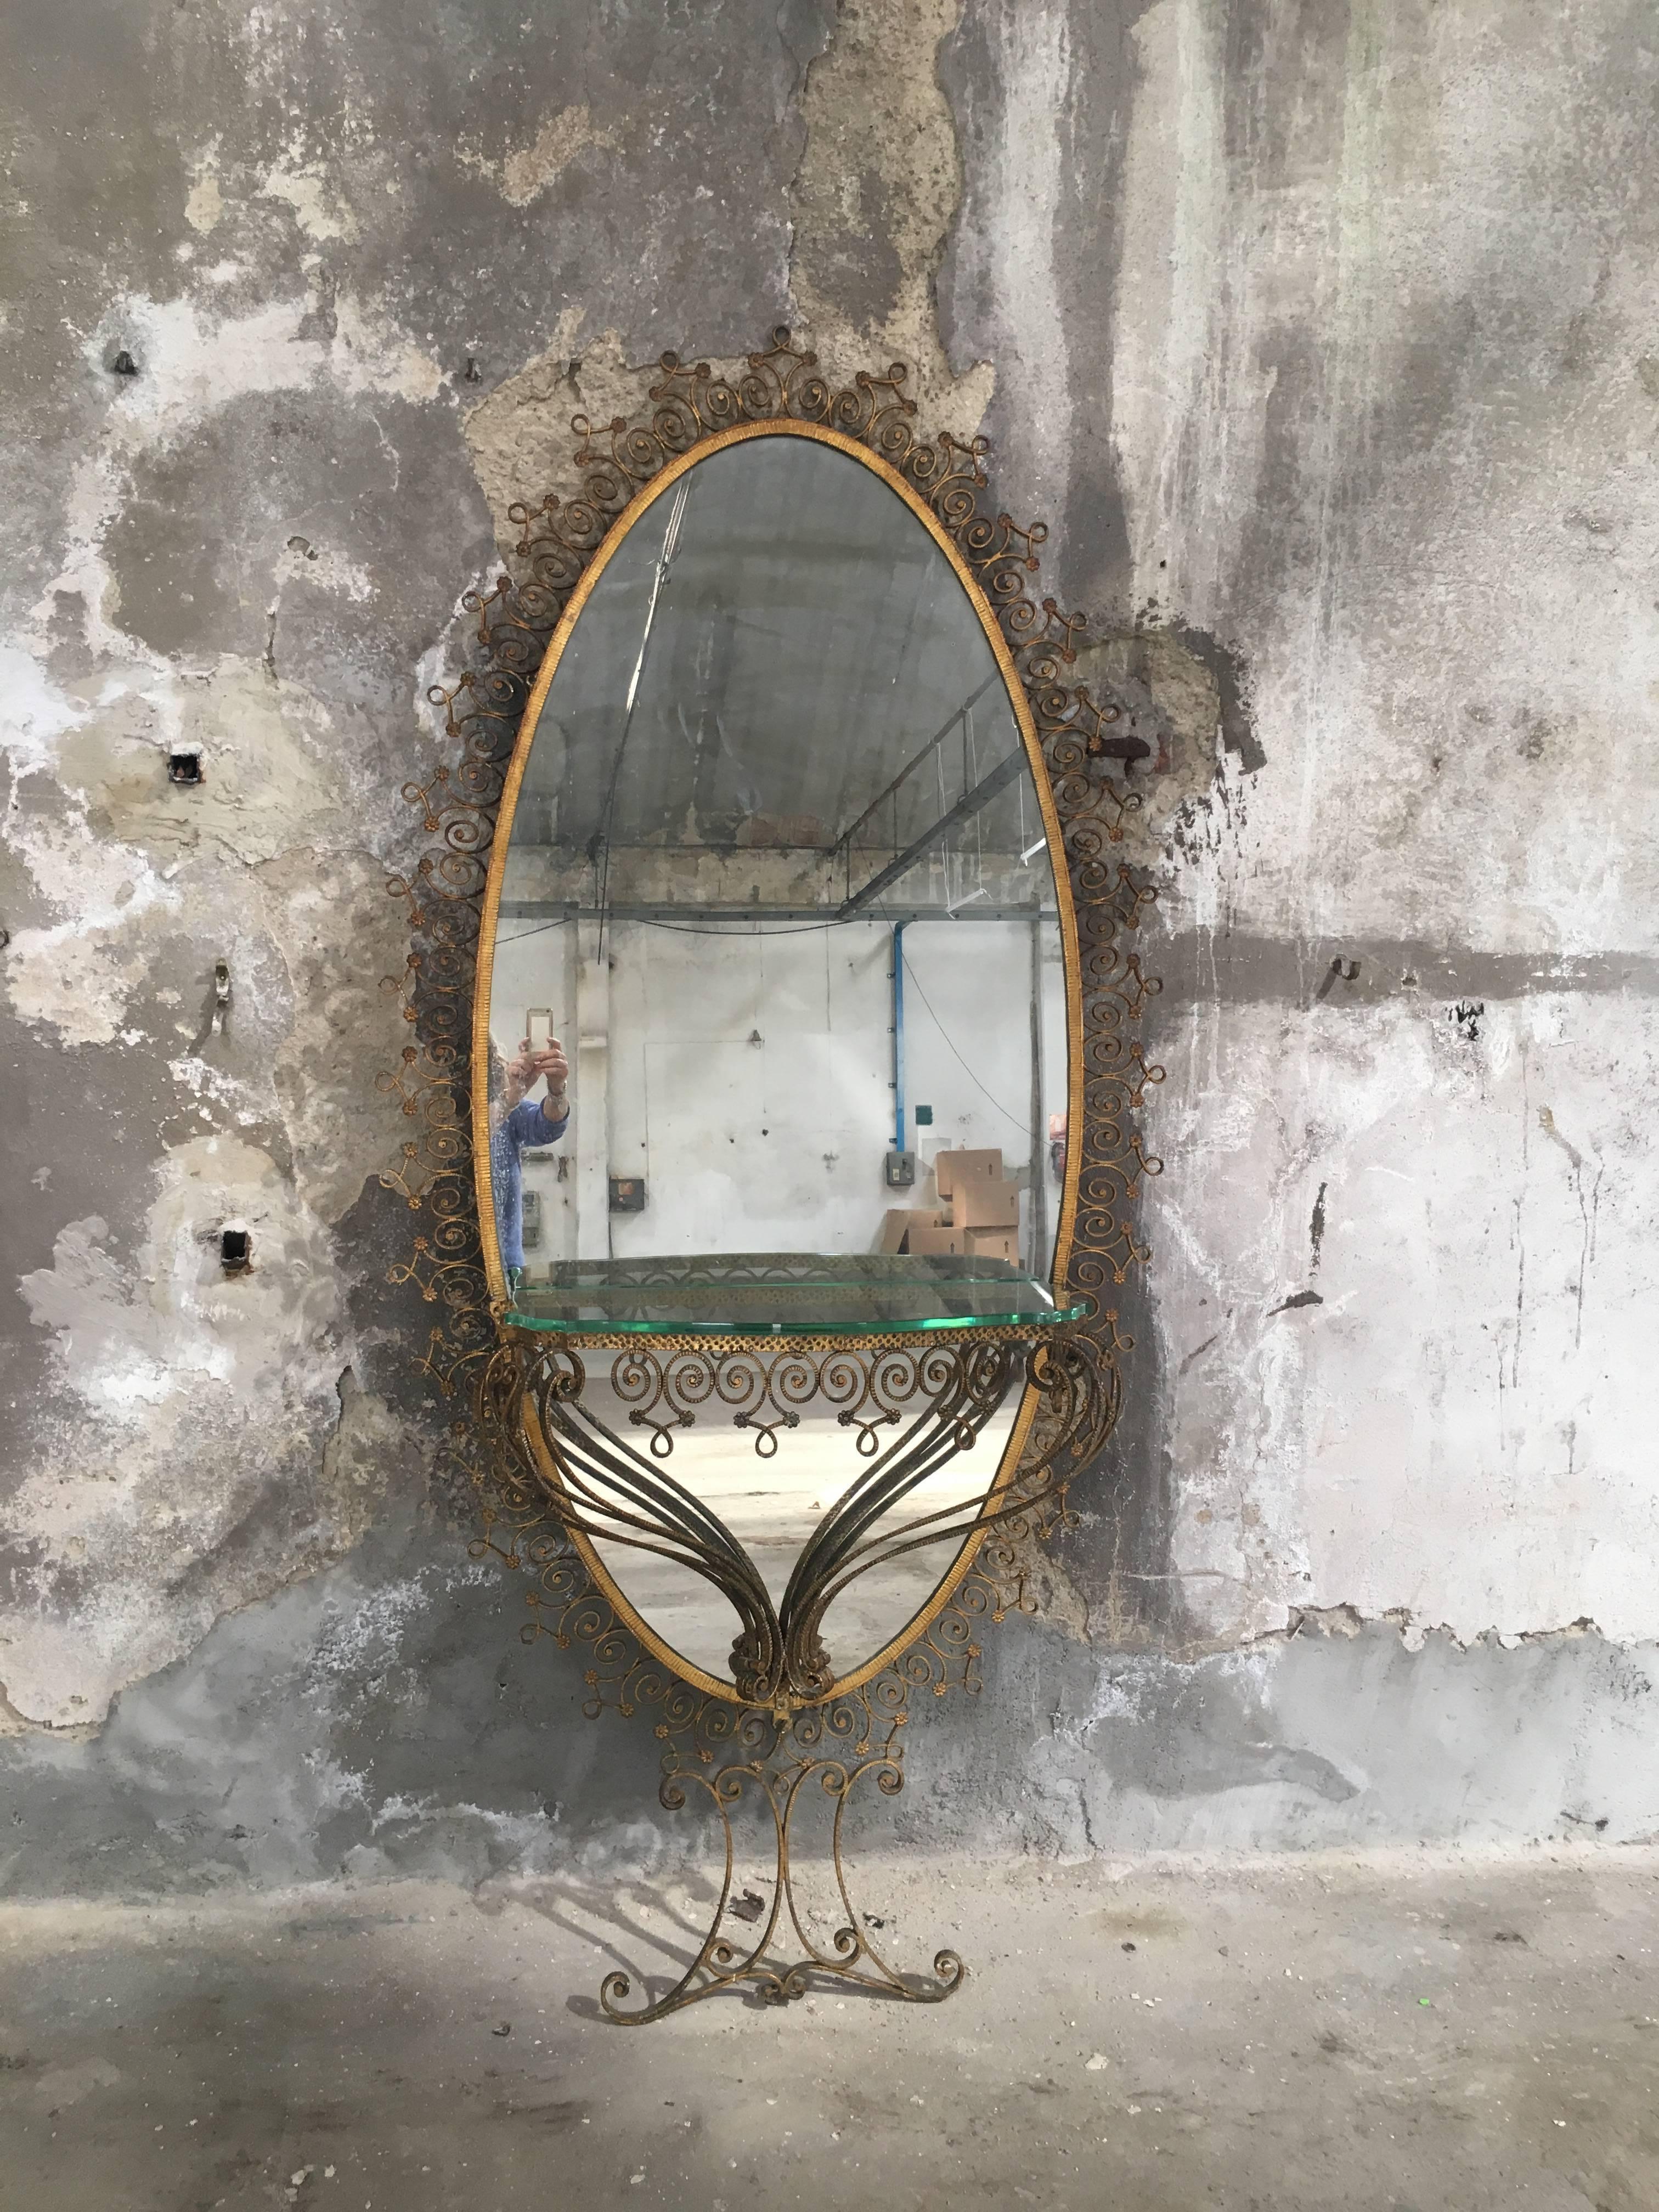 Monumental mirror with console having Verde Nilo Murano glass top by Pier Luigi Colli, Italy, 1955
Measurements:
Mirror: width cm.106, height cm.225
Console: width cm.79, depth cm.33, height cm.56.